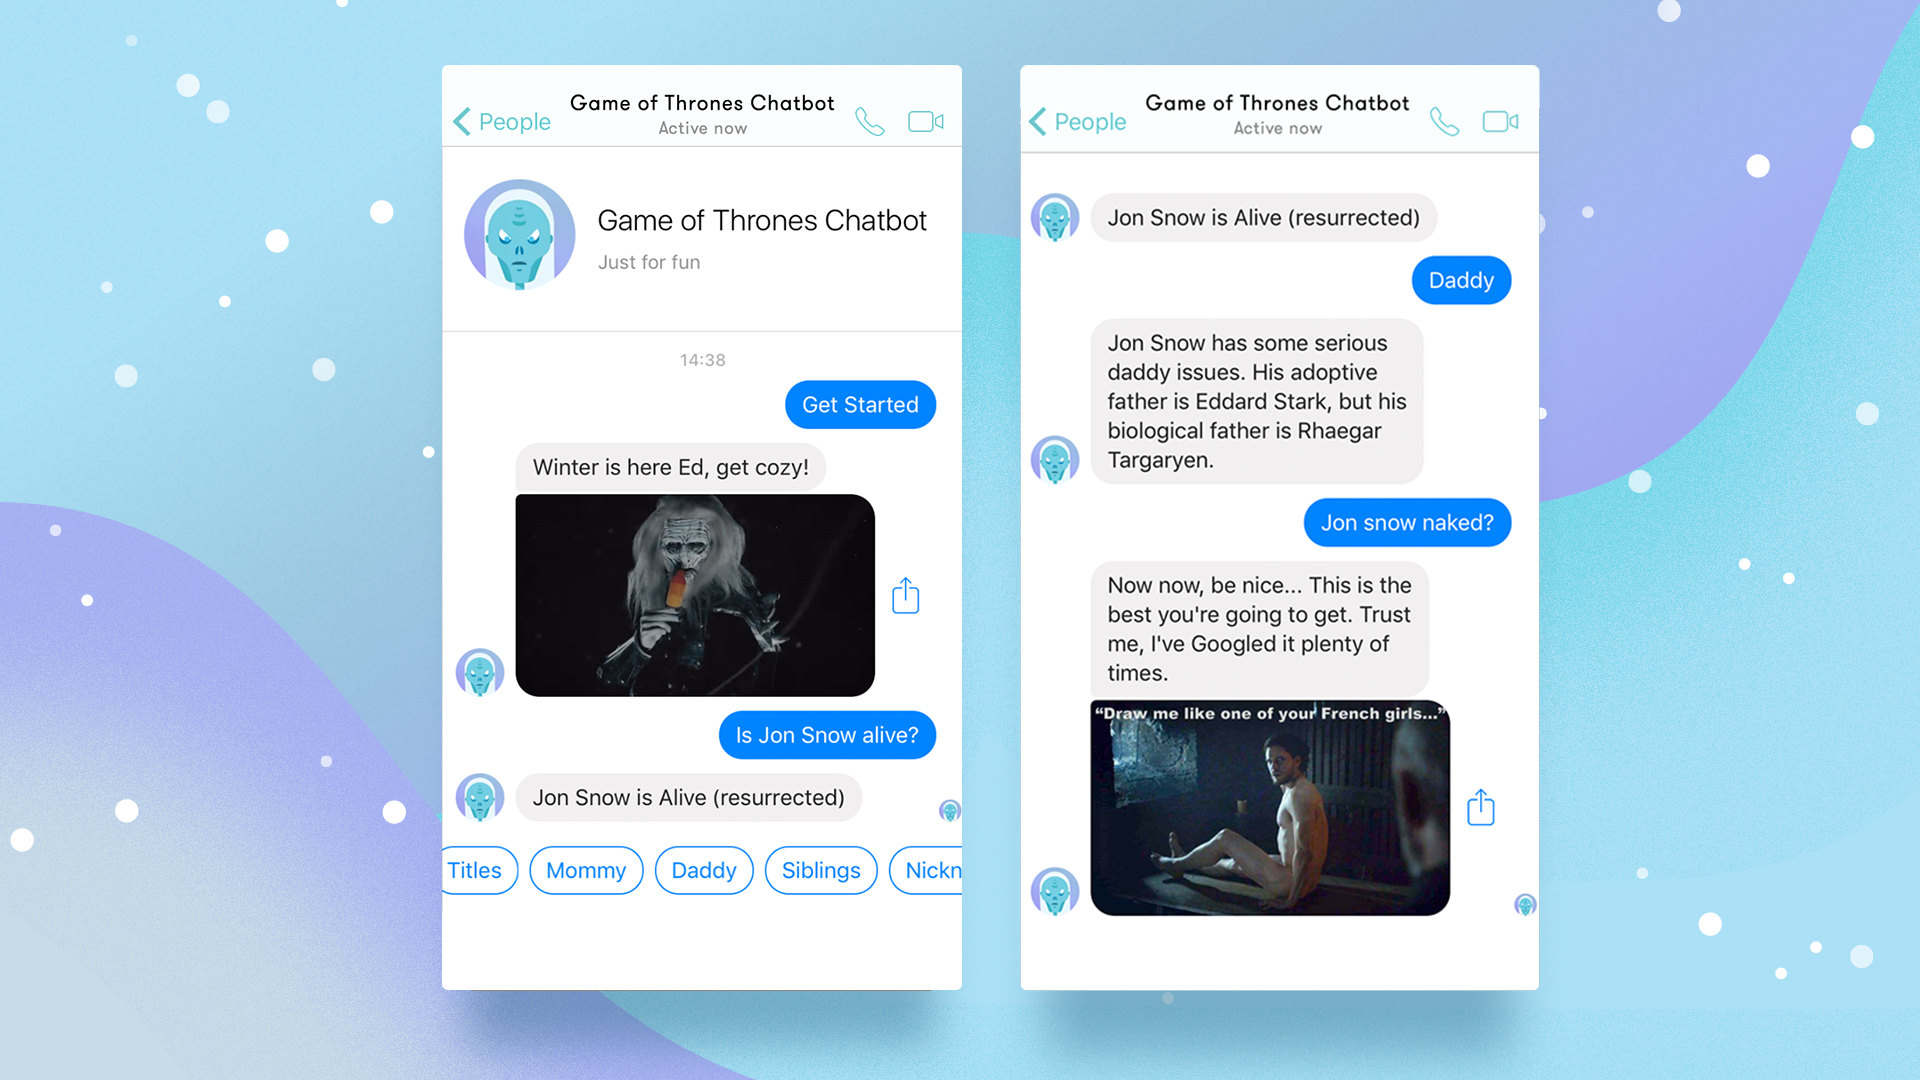 RoboticsExpo. In love with Game of Thrones? Chatbot will share your feelings!